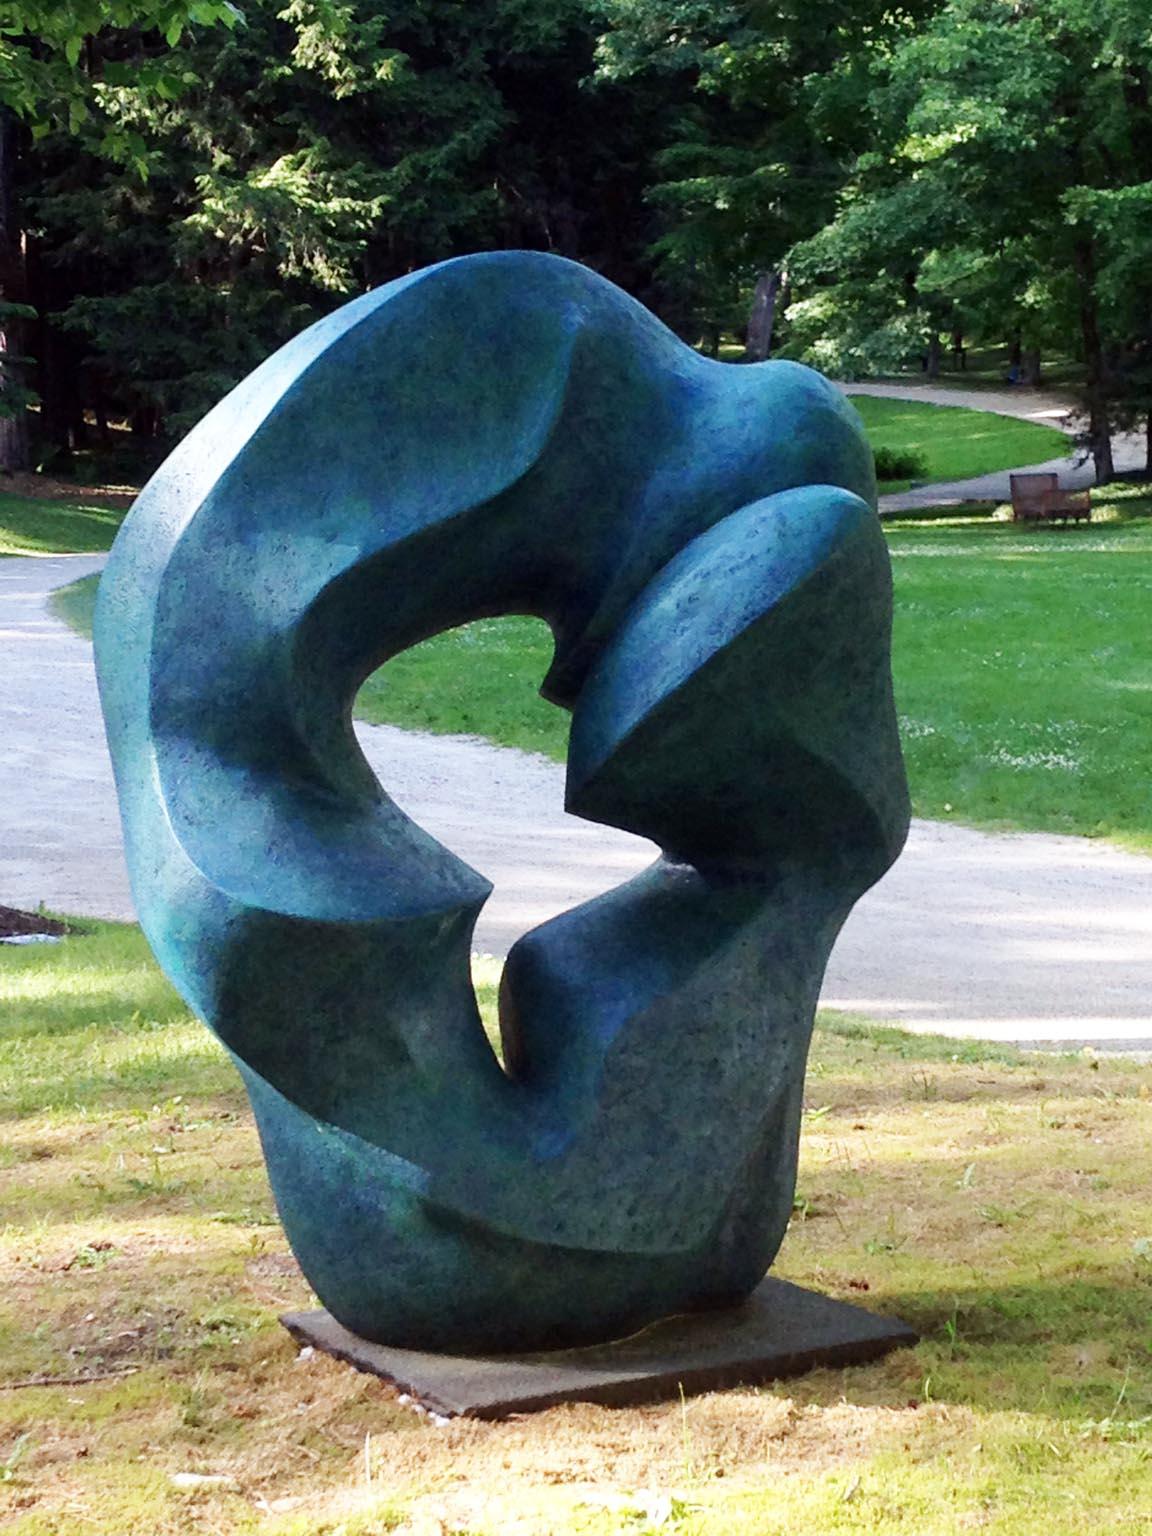 Elaine Lorenz has exhibited her work in numerous exhibitions and sculpture sites throughout the US, among them the Socrates Sculpture Park, Long Island City, NY; the Newark and Montclair Museums, NJ, and the International Sculpture Center,